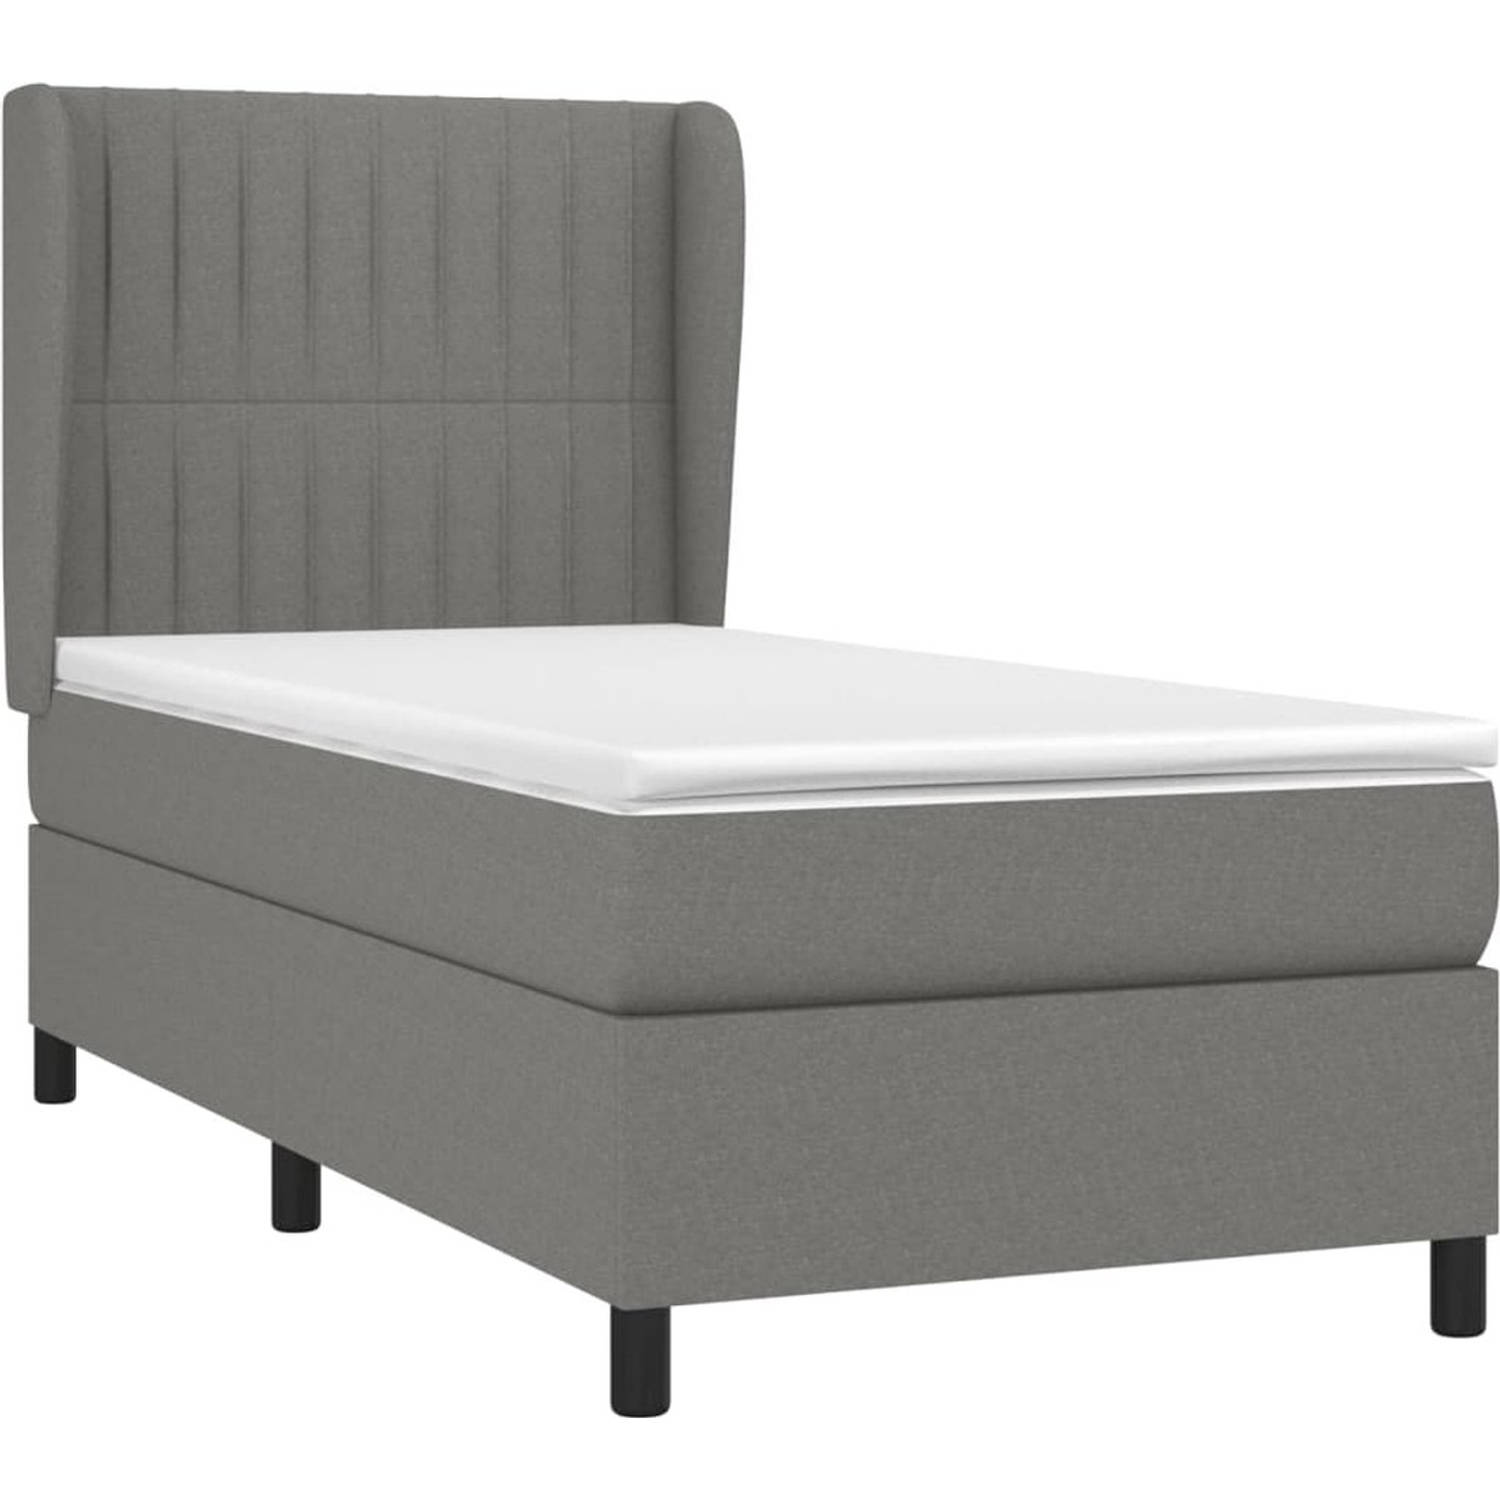 The Living Store Boxspringbed - naam - Bed - 203x103x118/128 cm - Donkergrijs